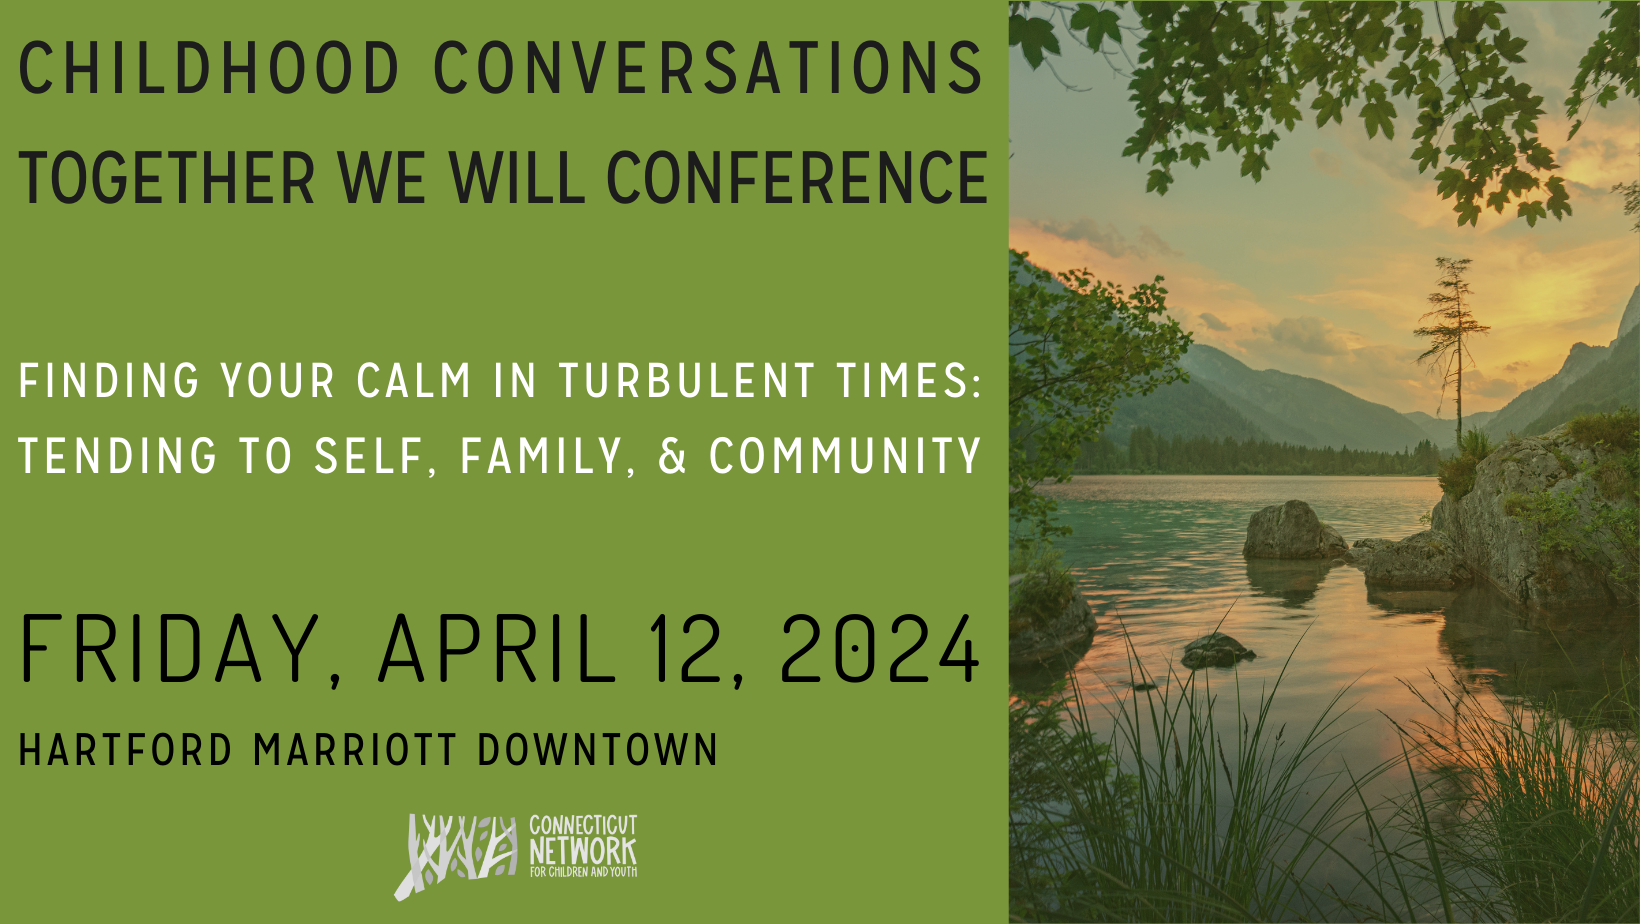 Childhood Conversations Together We Will Conference